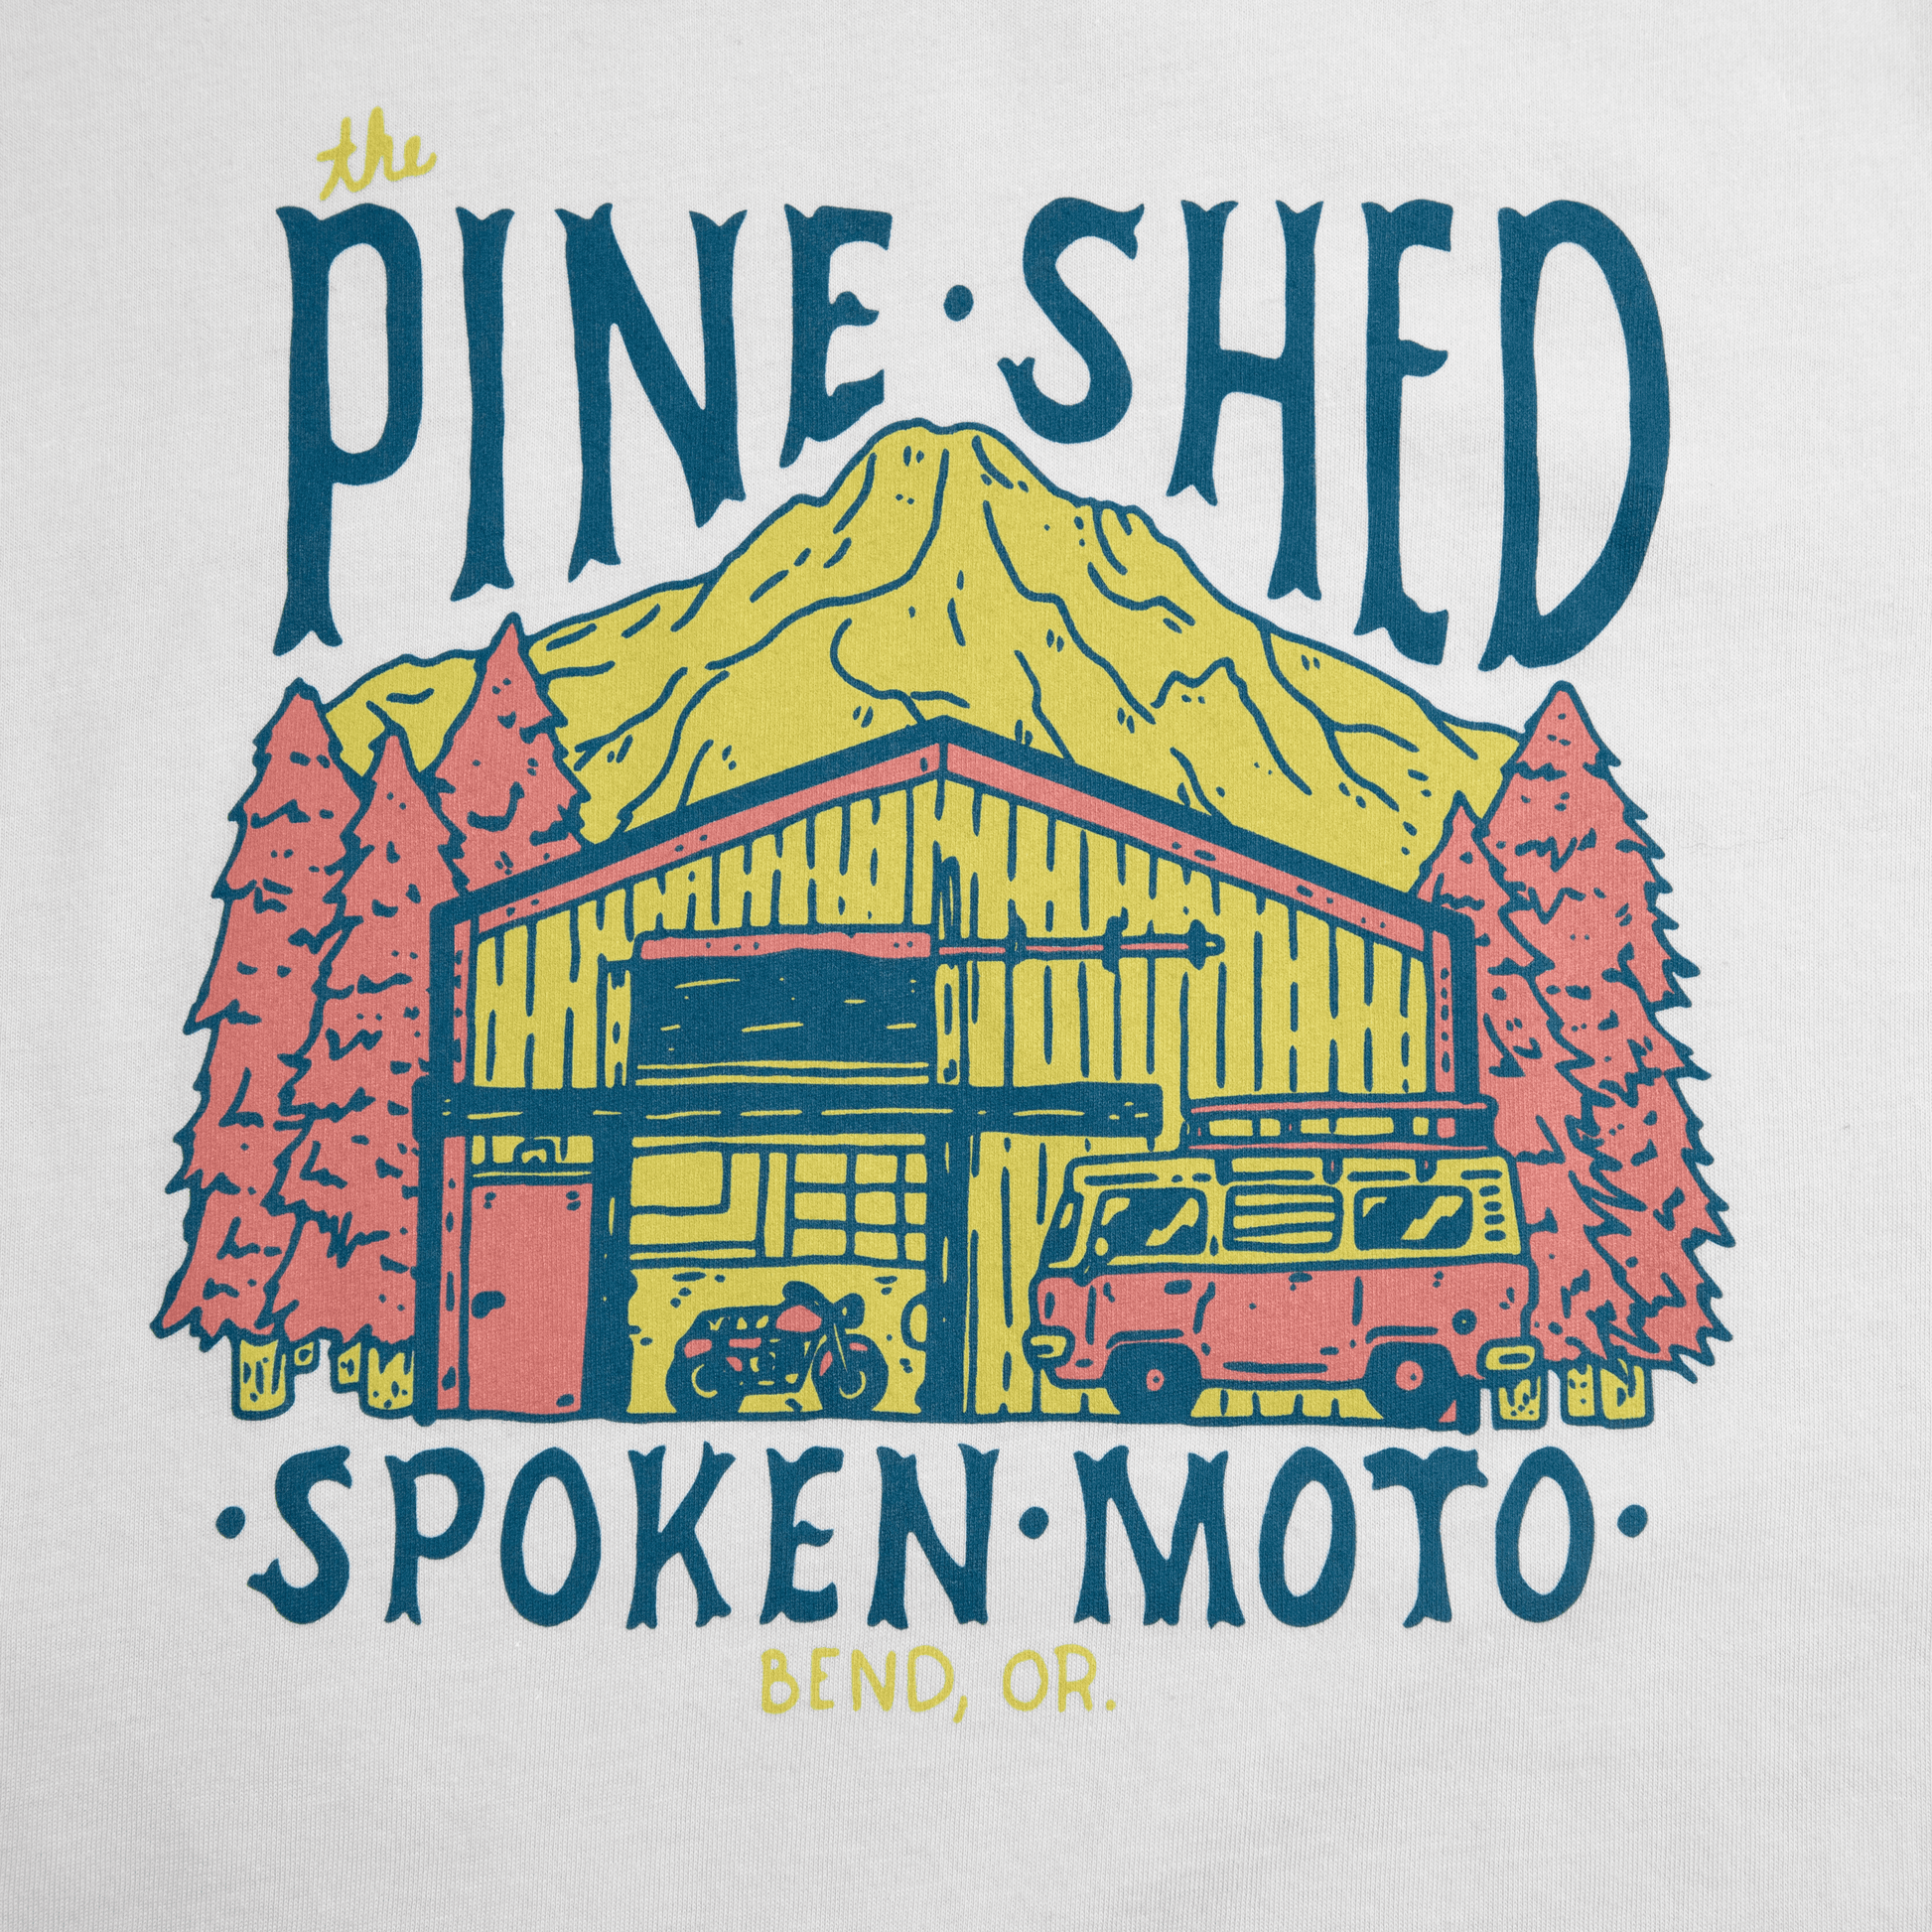 Detail shot of the colorful pine shed illustration featured on the front of the tee.